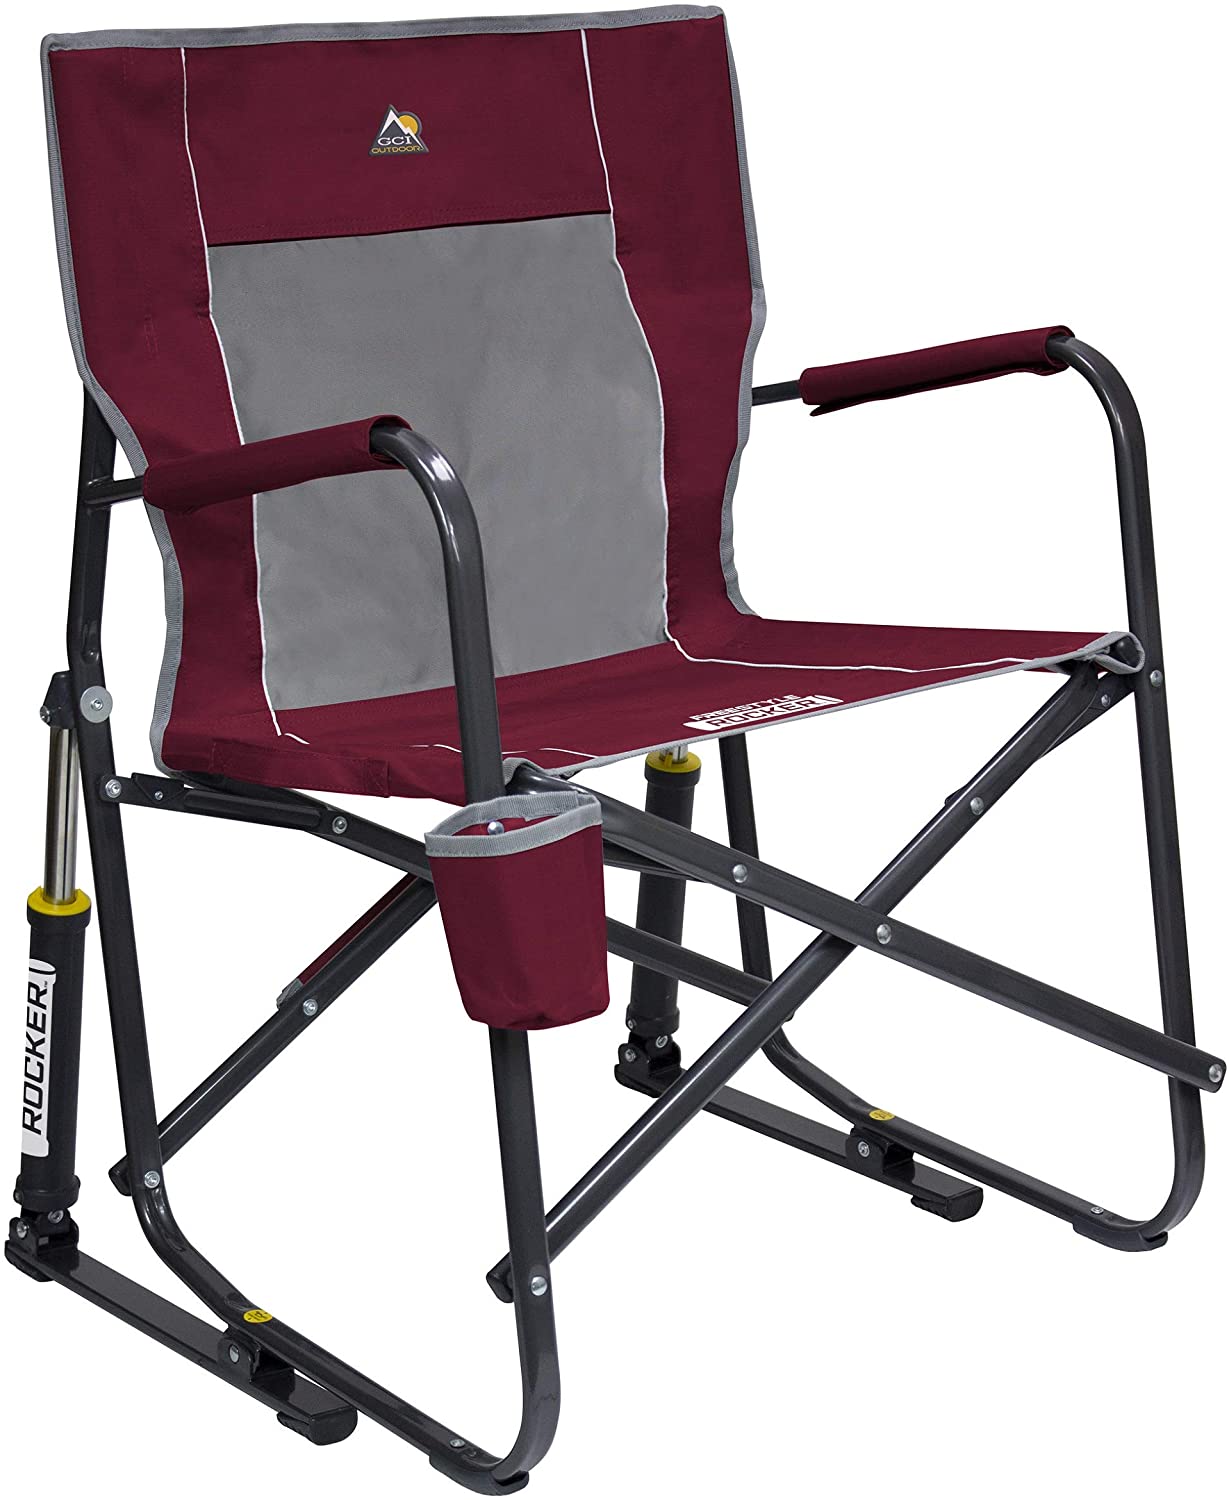 GCI Outdoor Freestyle Rocker Patented Spring-Action Fold-Up Rocking Chair